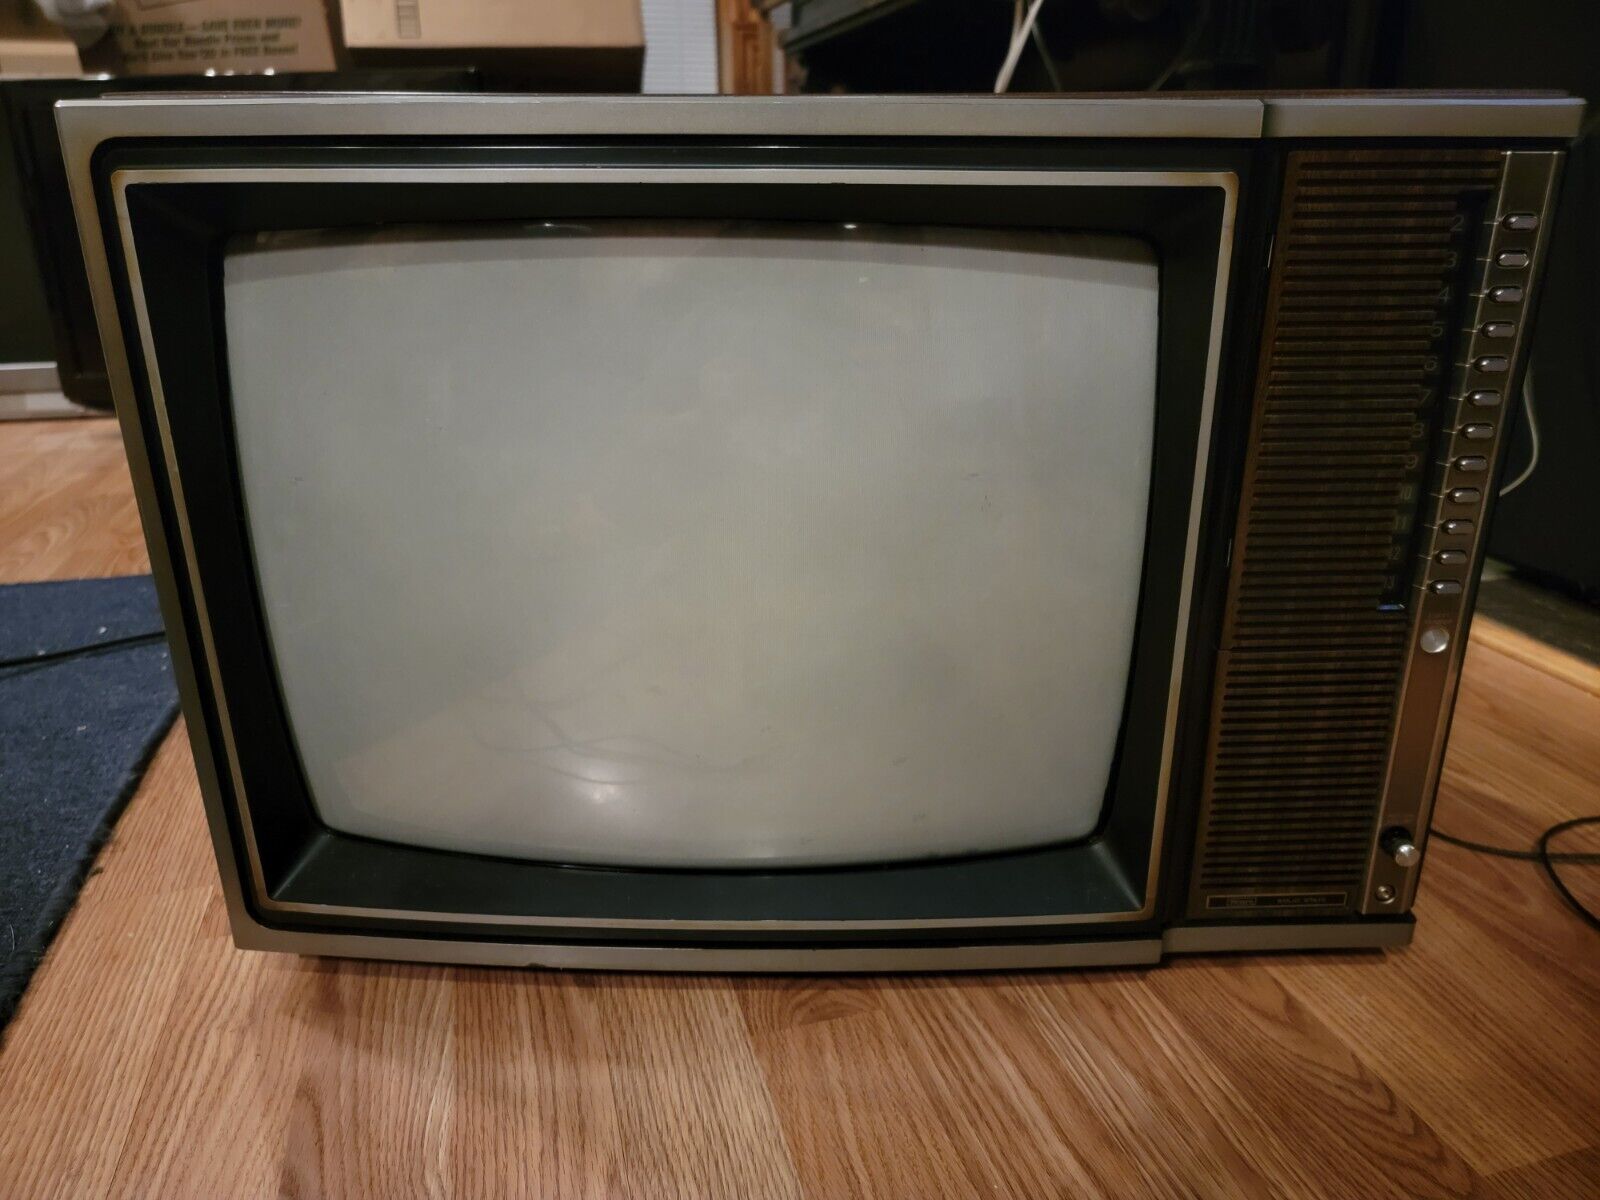 Vintage 1979 Sears Solid State 19 Inch CRT TV 564-42110900 